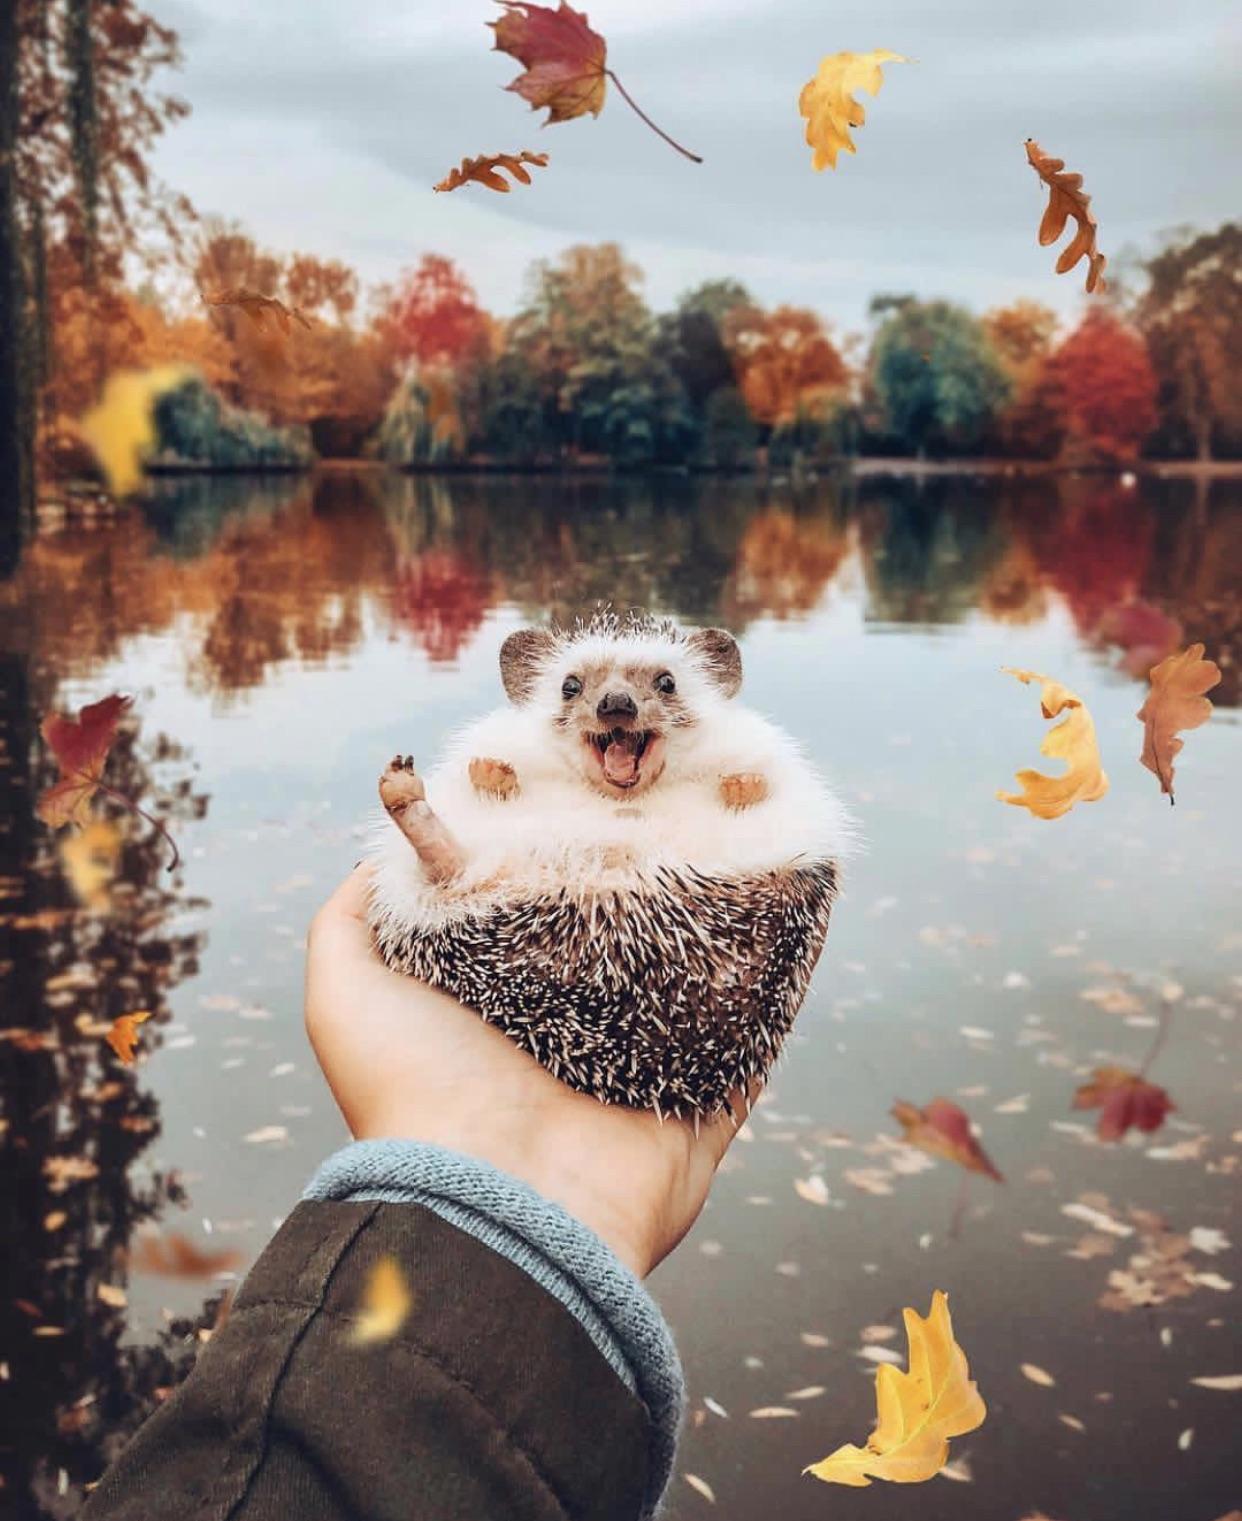 A happy hedgehog! Why? Because it's cute!